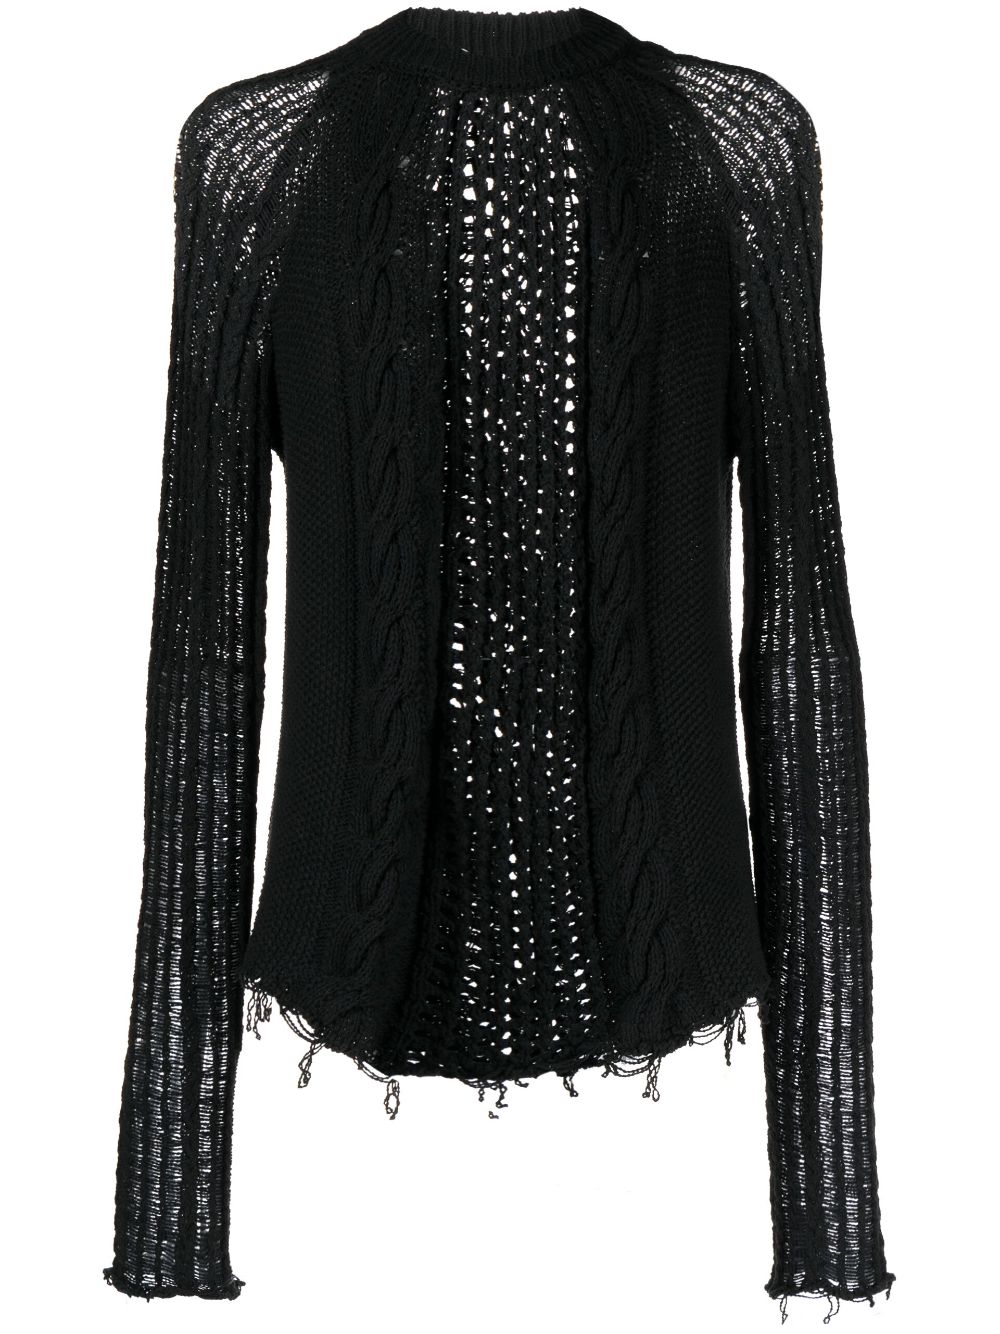 BALMAIN DISTRESSED CABLE-KNIT JUMPER